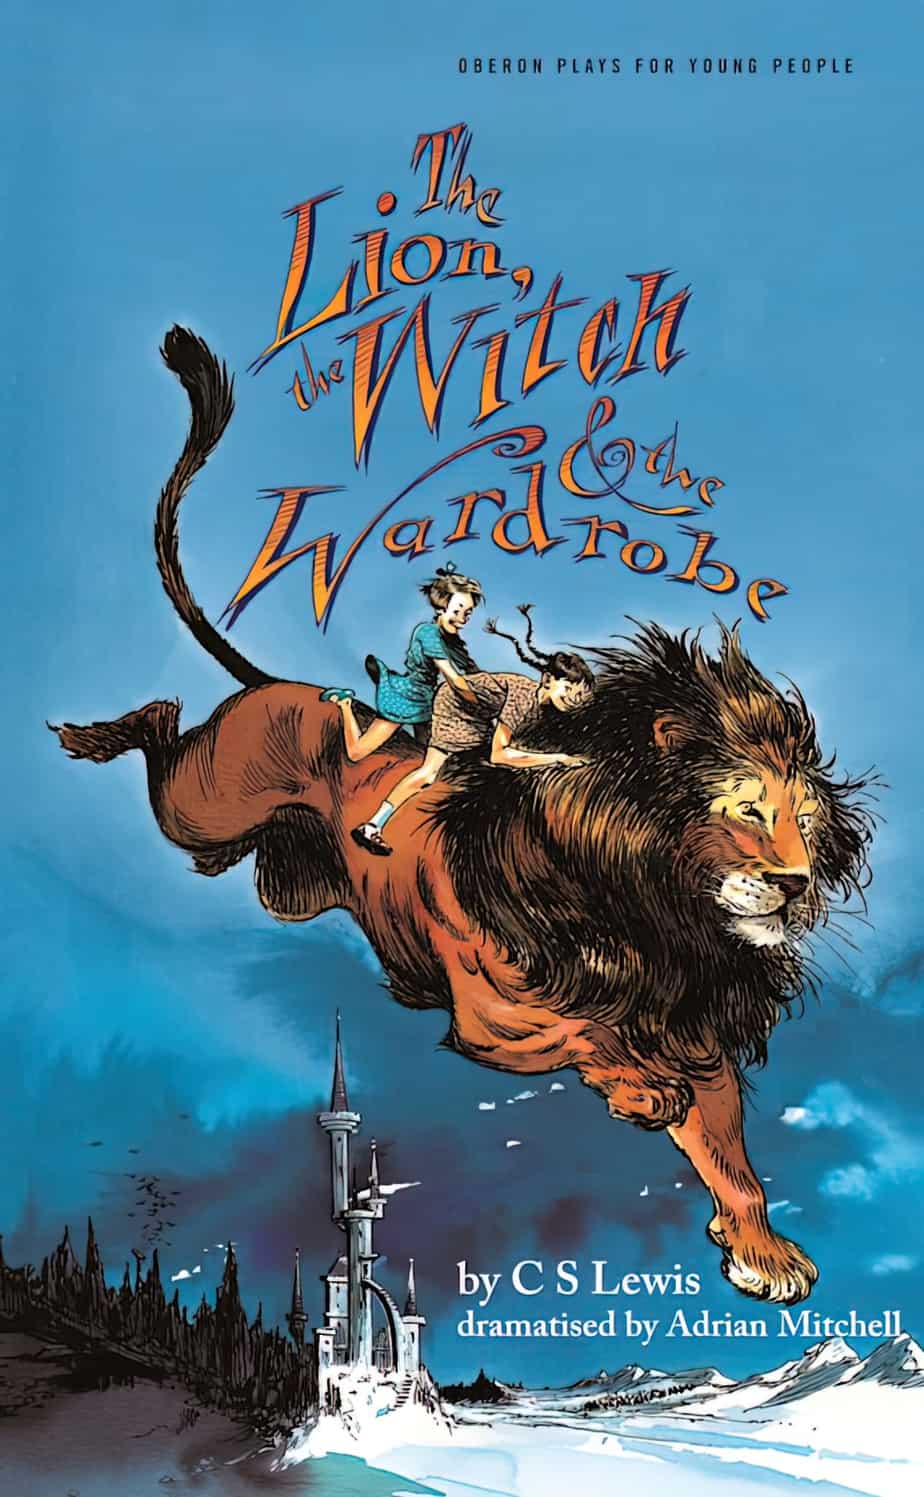 The Lion The Witch and the Wardrobe Oberon Plays for Young People